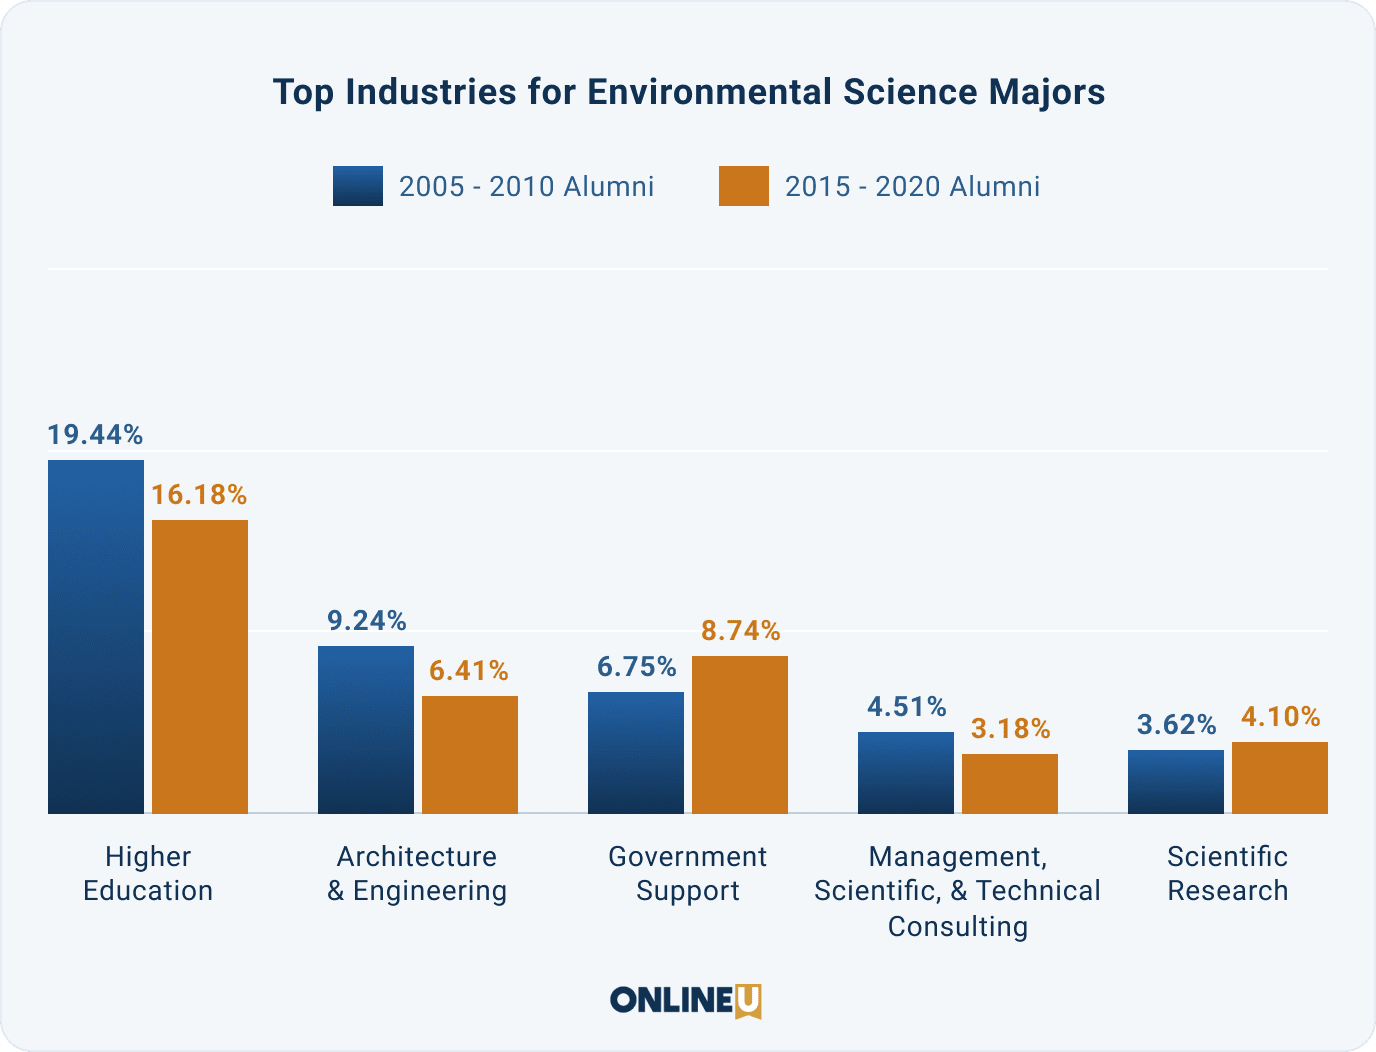 Graph comparing the top industries for environmental science majors who graduated from 2005 through 2010, versus alumni from 2015 through 2020